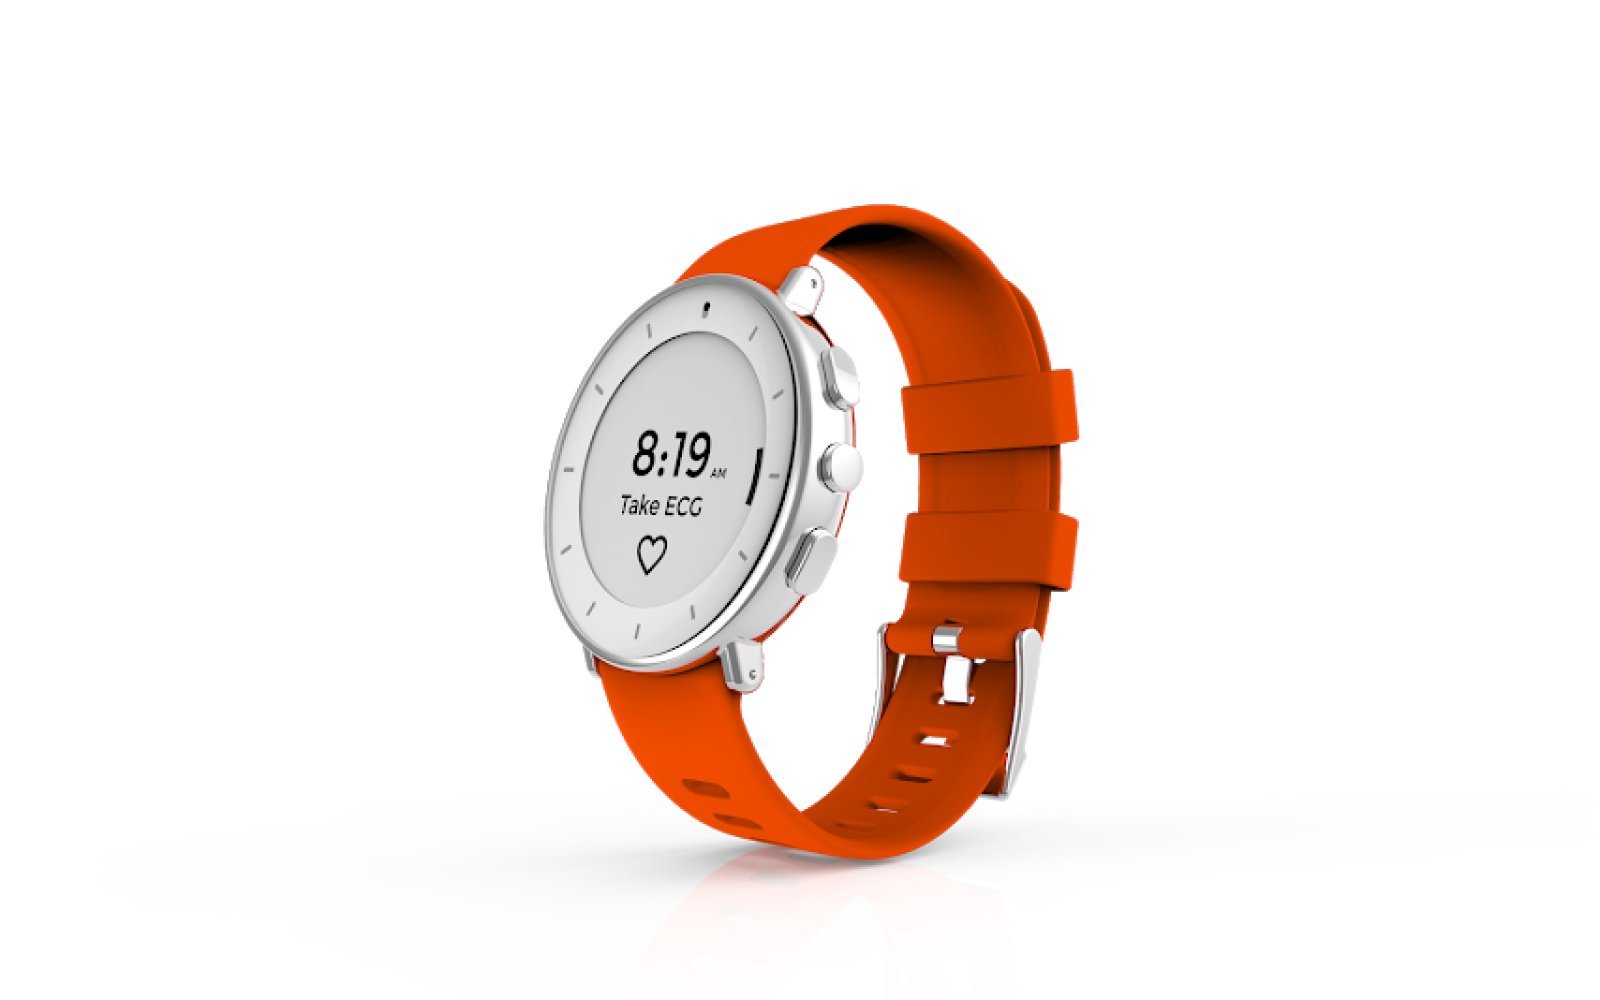 Verily‘s Study Watch Receives FDA's 510 (k) Clearance for Cardiovascular Disorders